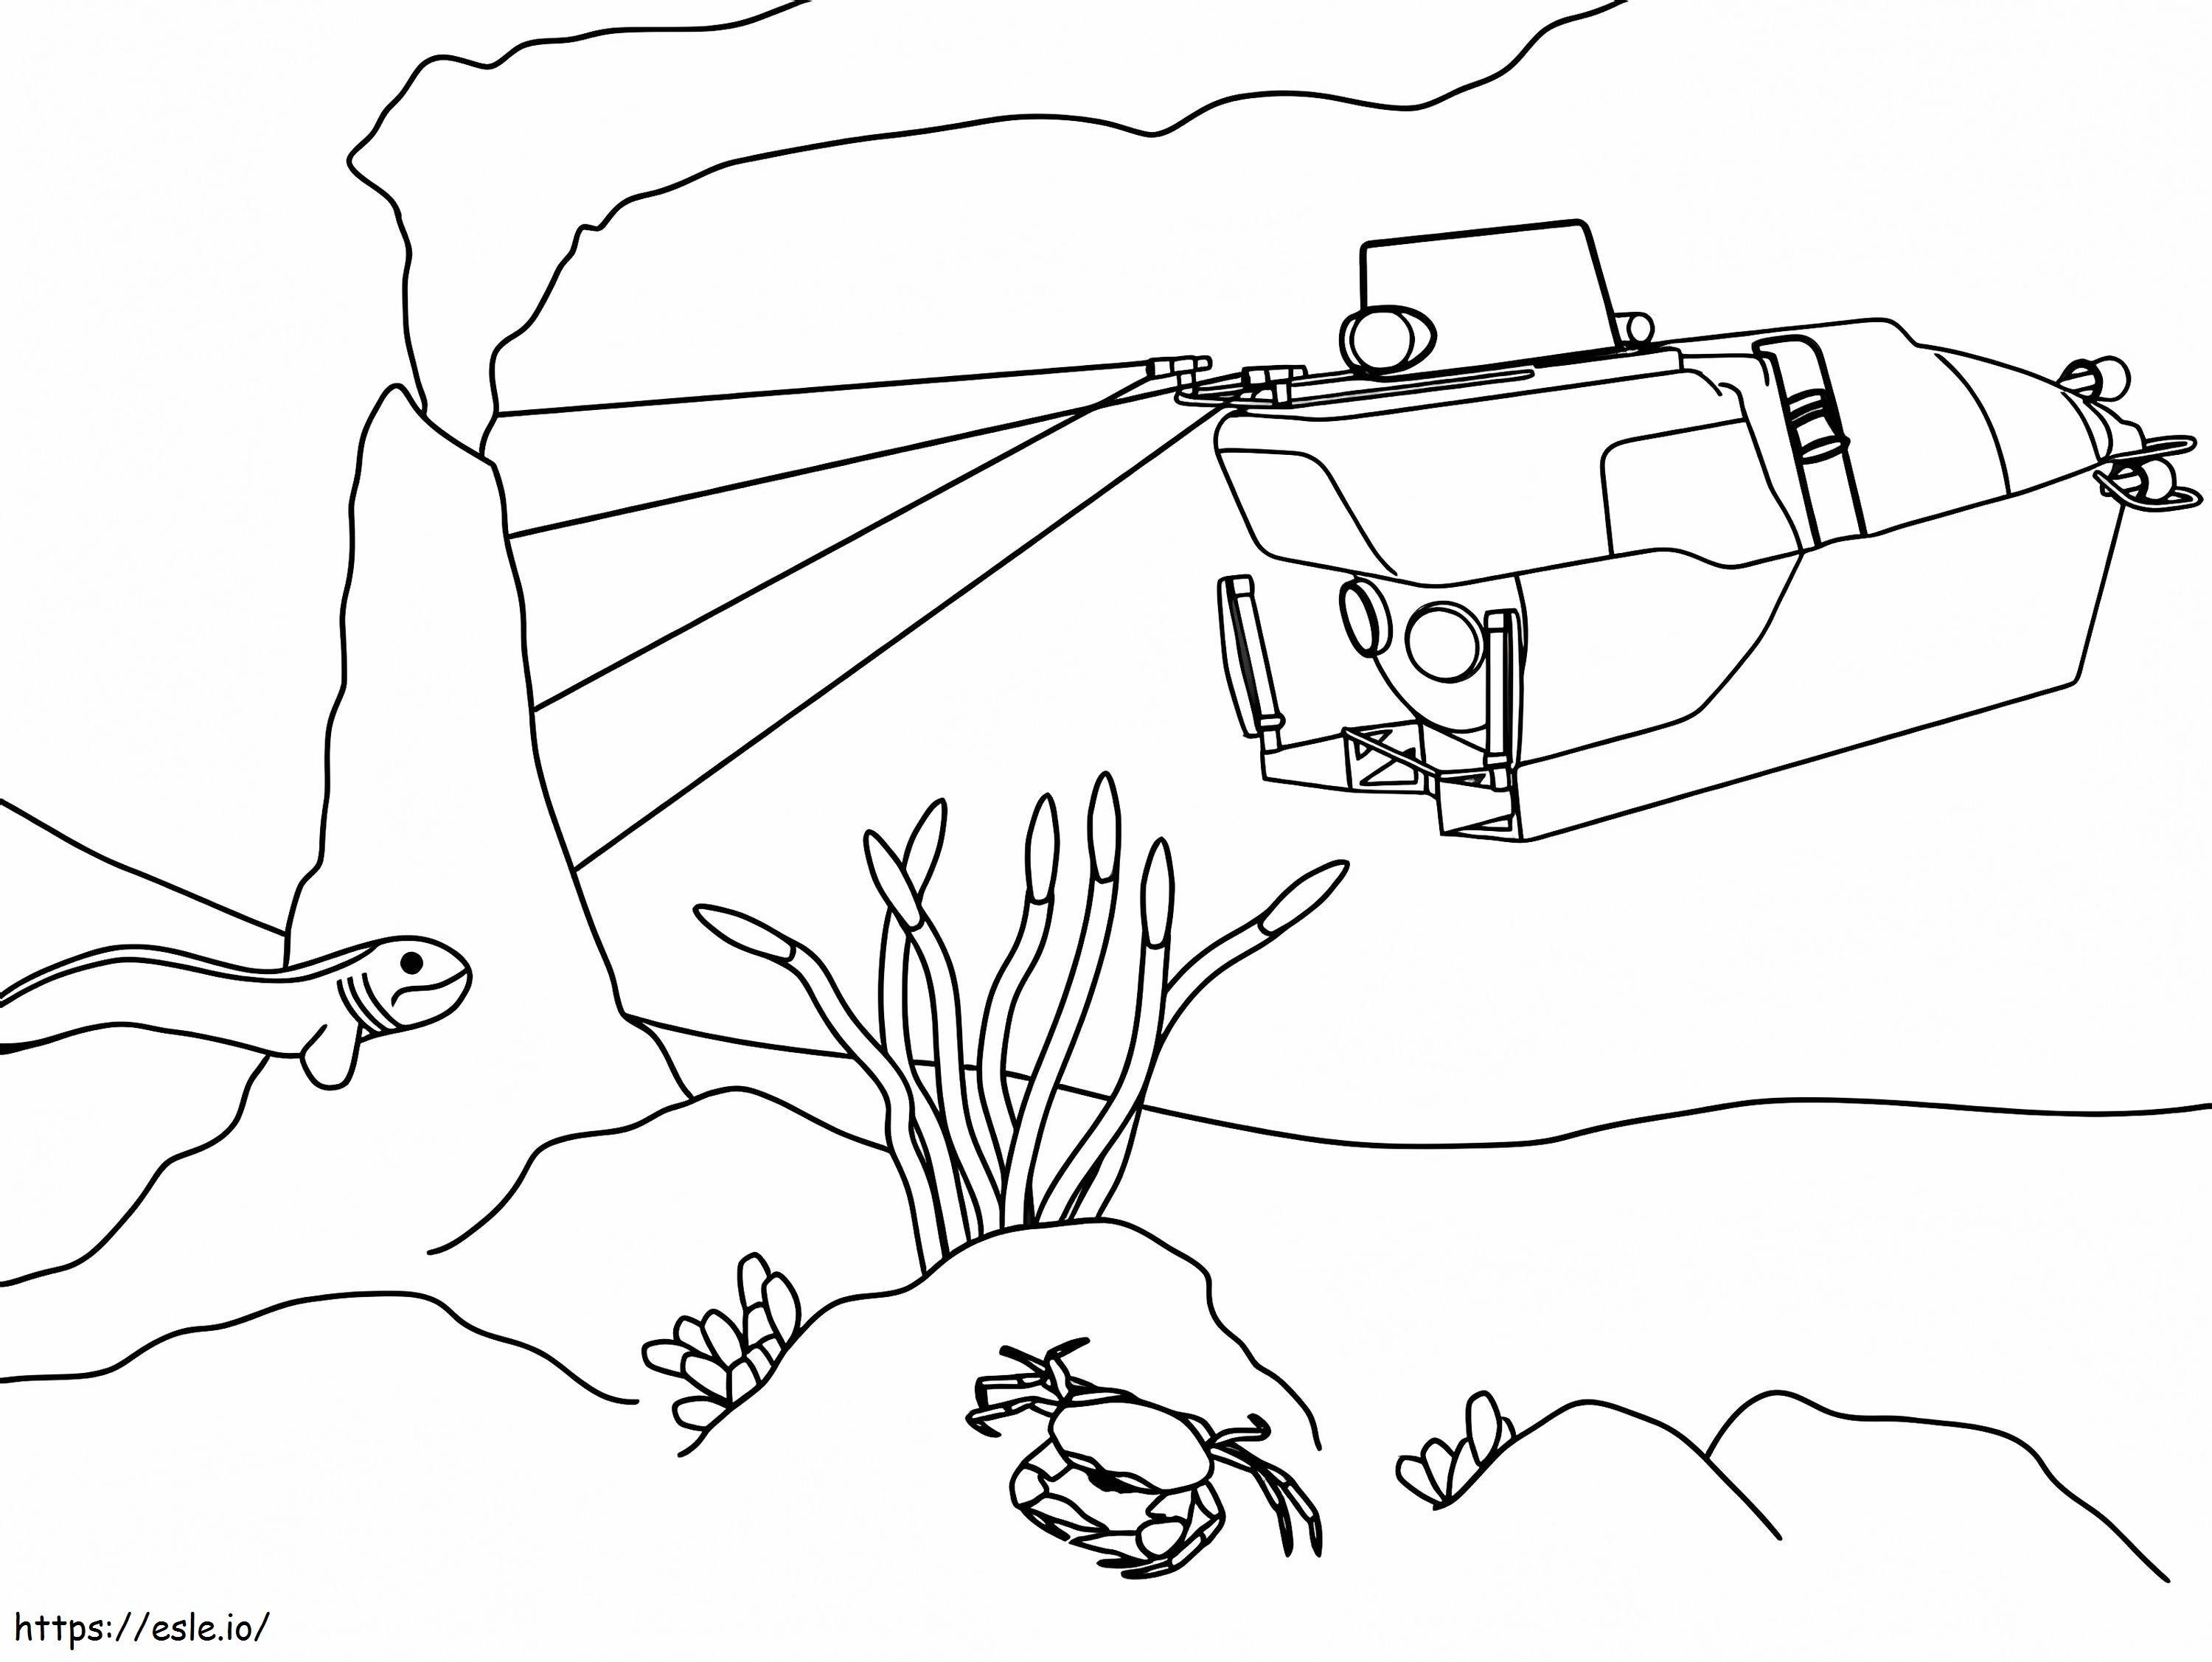 Submarine 8 coloring page